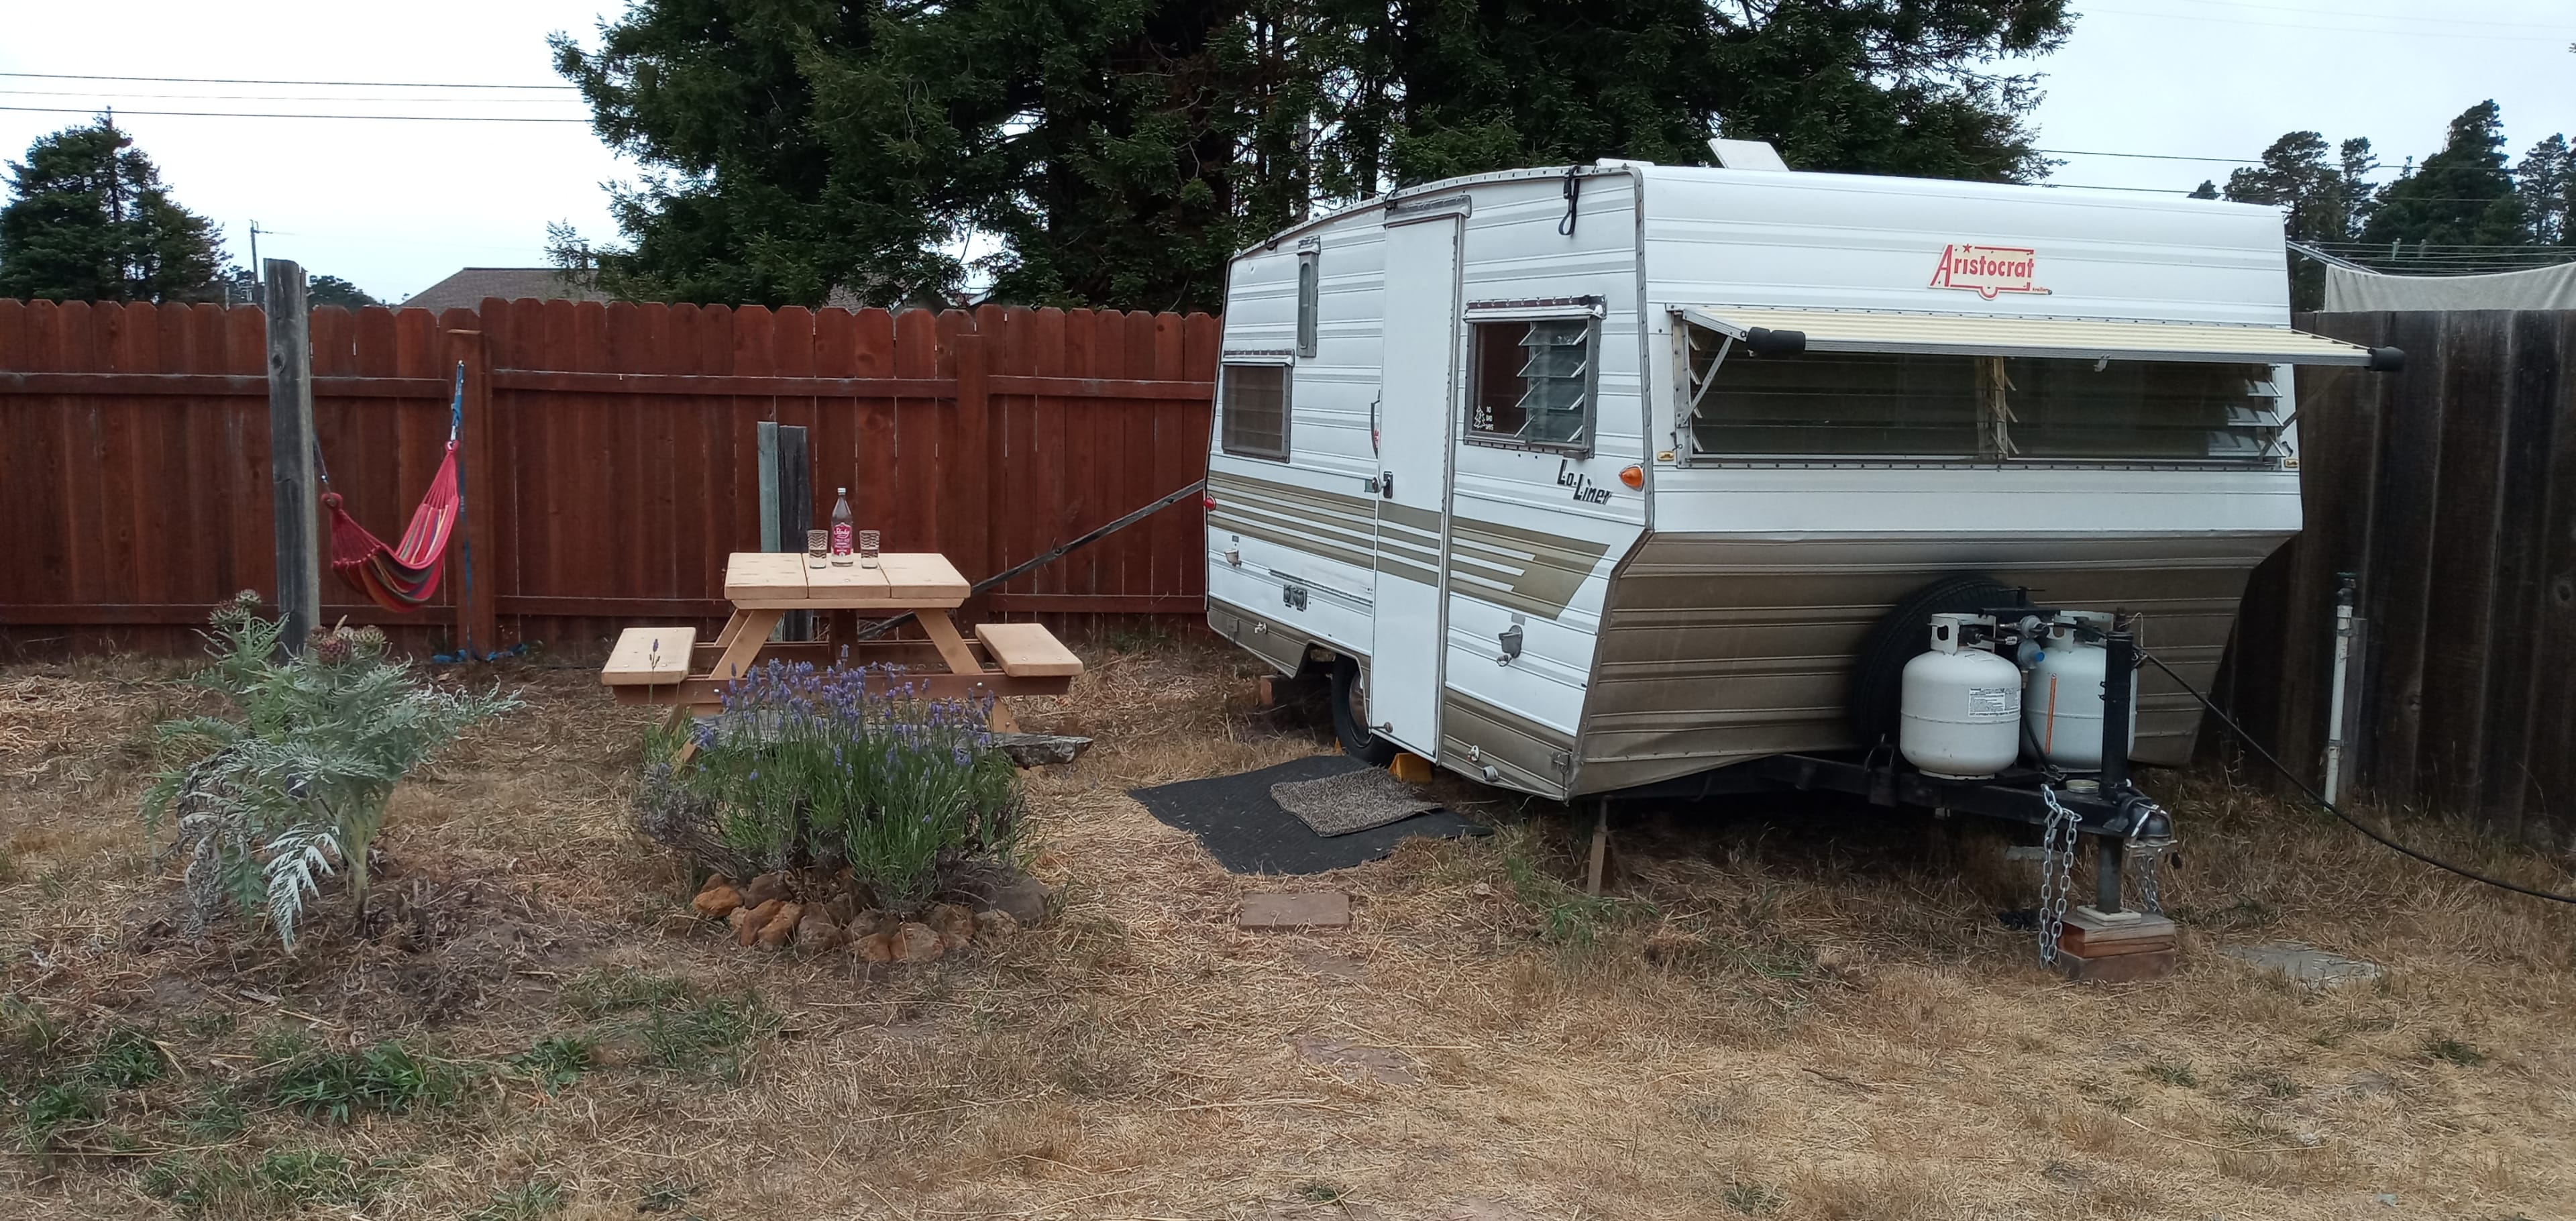 exterior view of trailer with picnic table and hammock